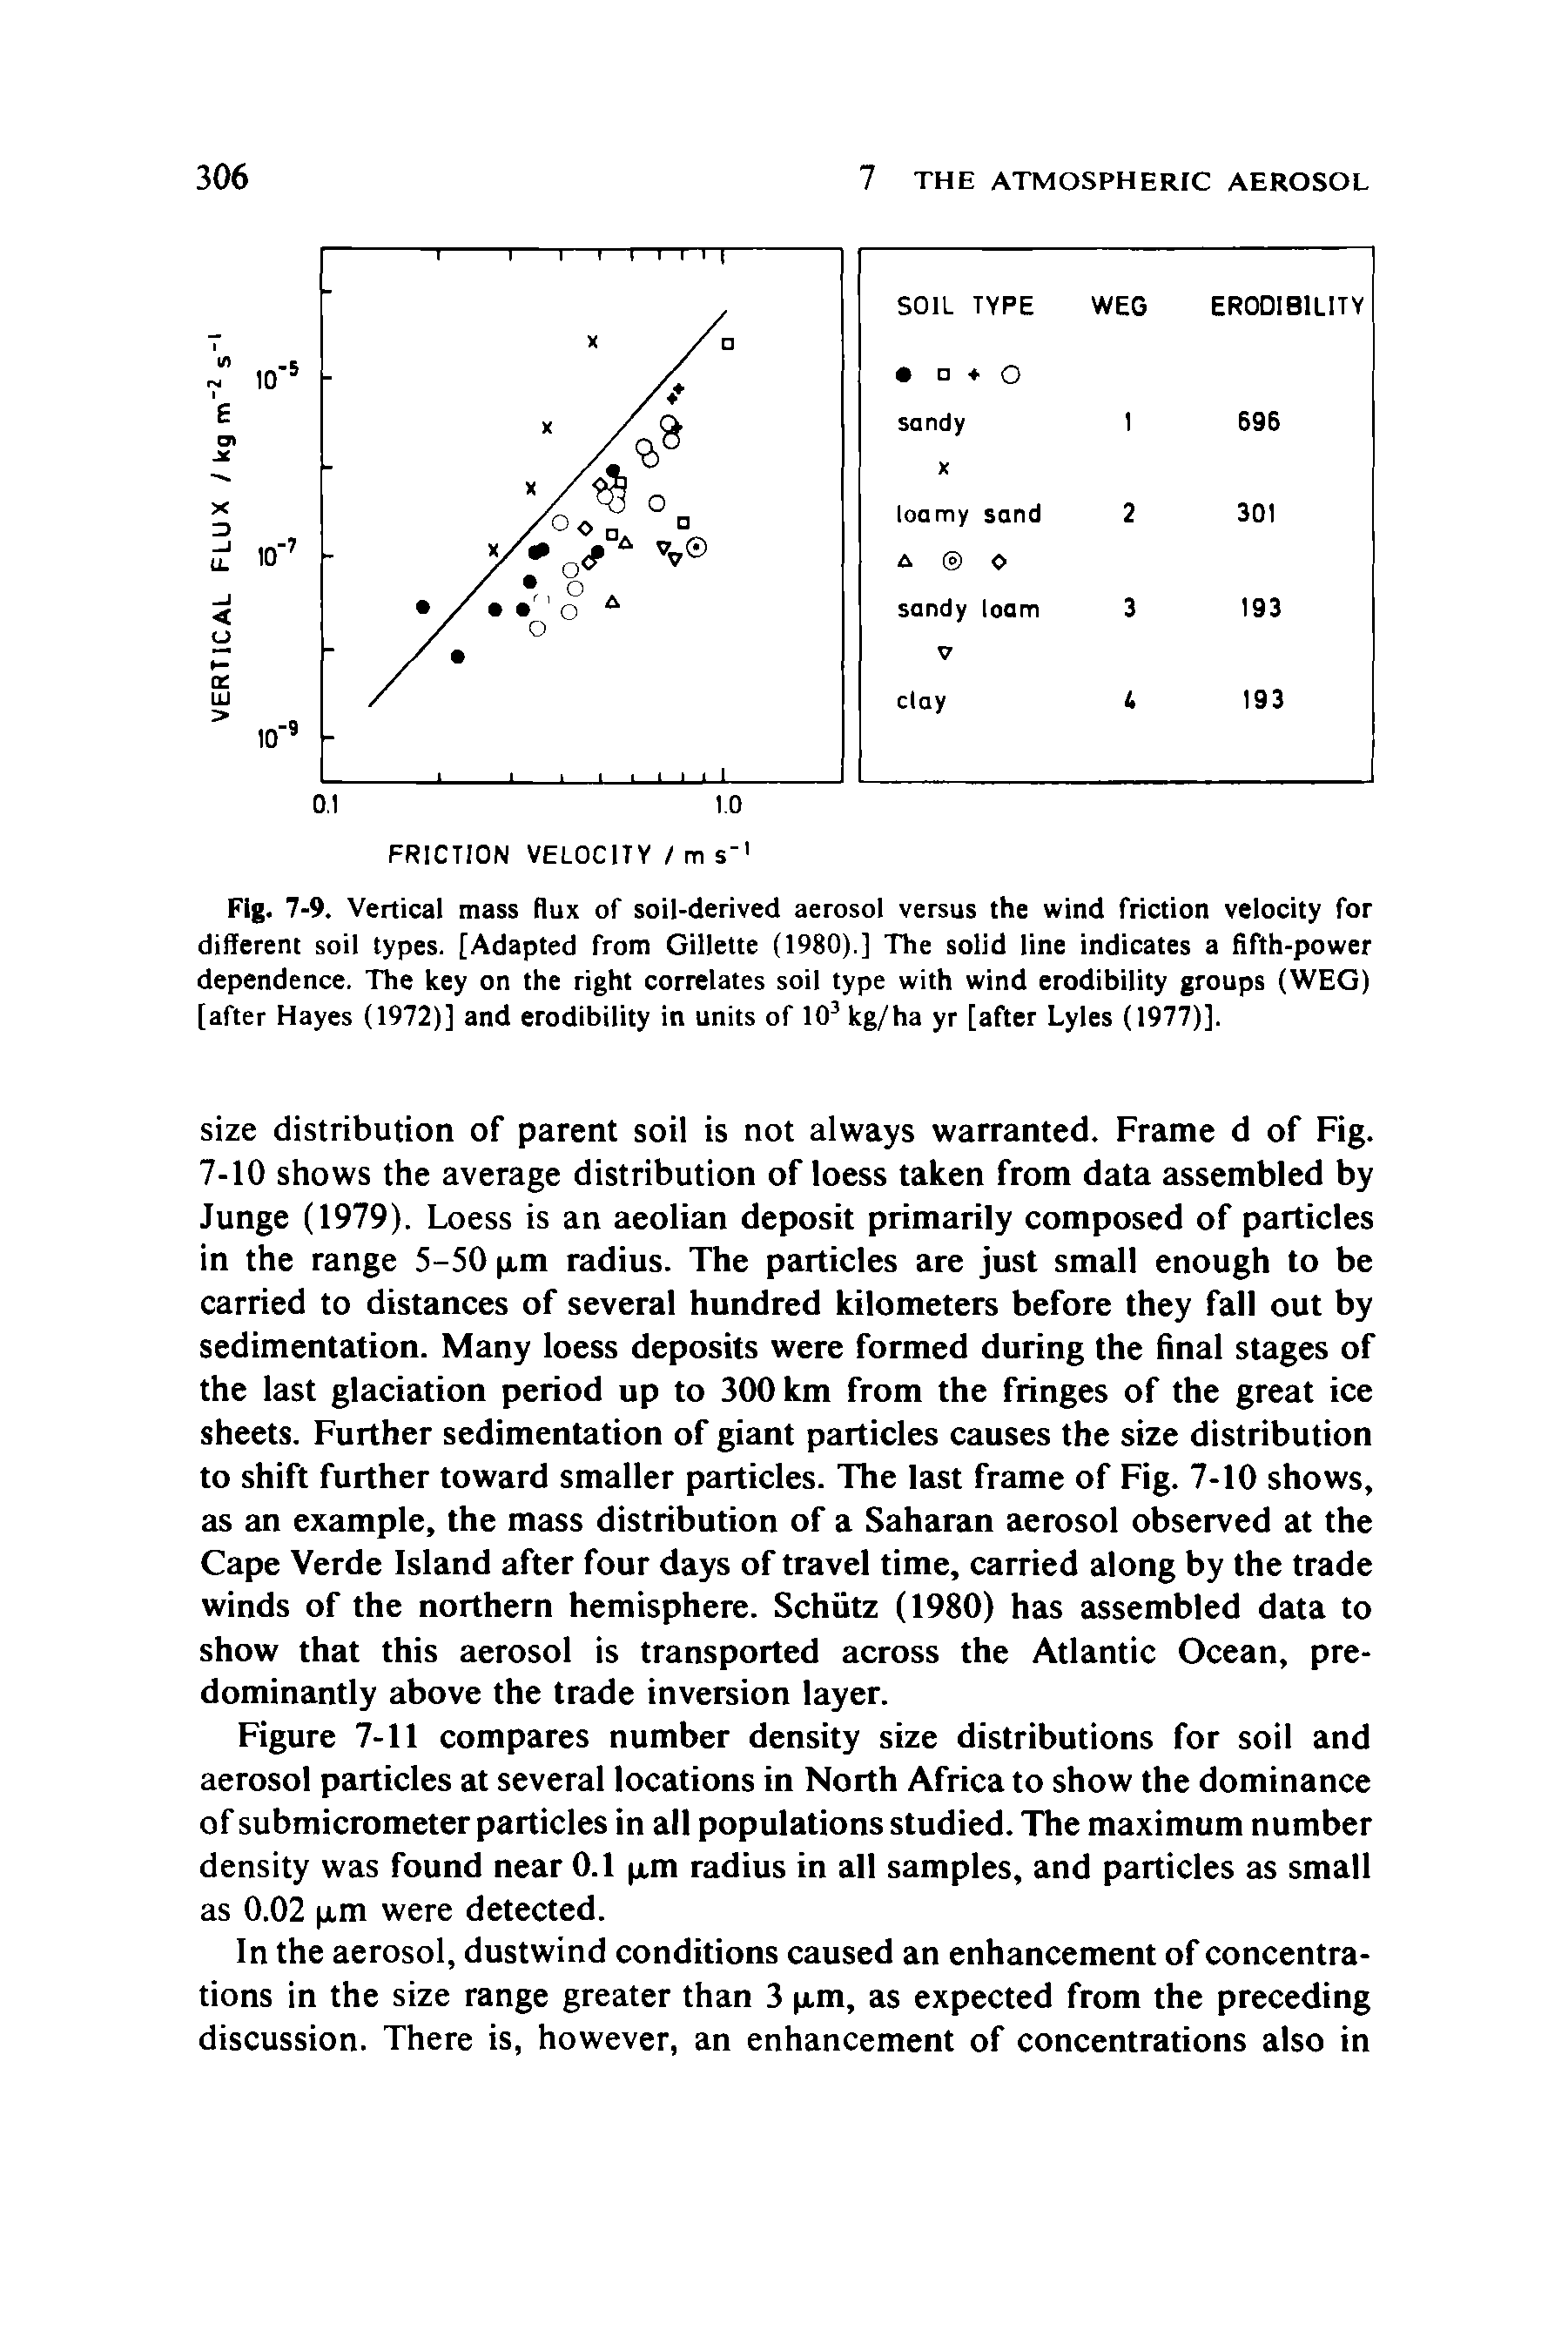 Fig. 7-9. Vertical mass flux of soil-derived aerosol versus the wind friction velocity for different soil types. [Adapted from Gillette (1980).] The solid line indicates a fifth-power dependence. The key on the right correlates soil type with wind erodibility groups (WEG) [after Hayes (1972)] and erodibility in units of 103 kg/ha yr [after Lyles (1977)].